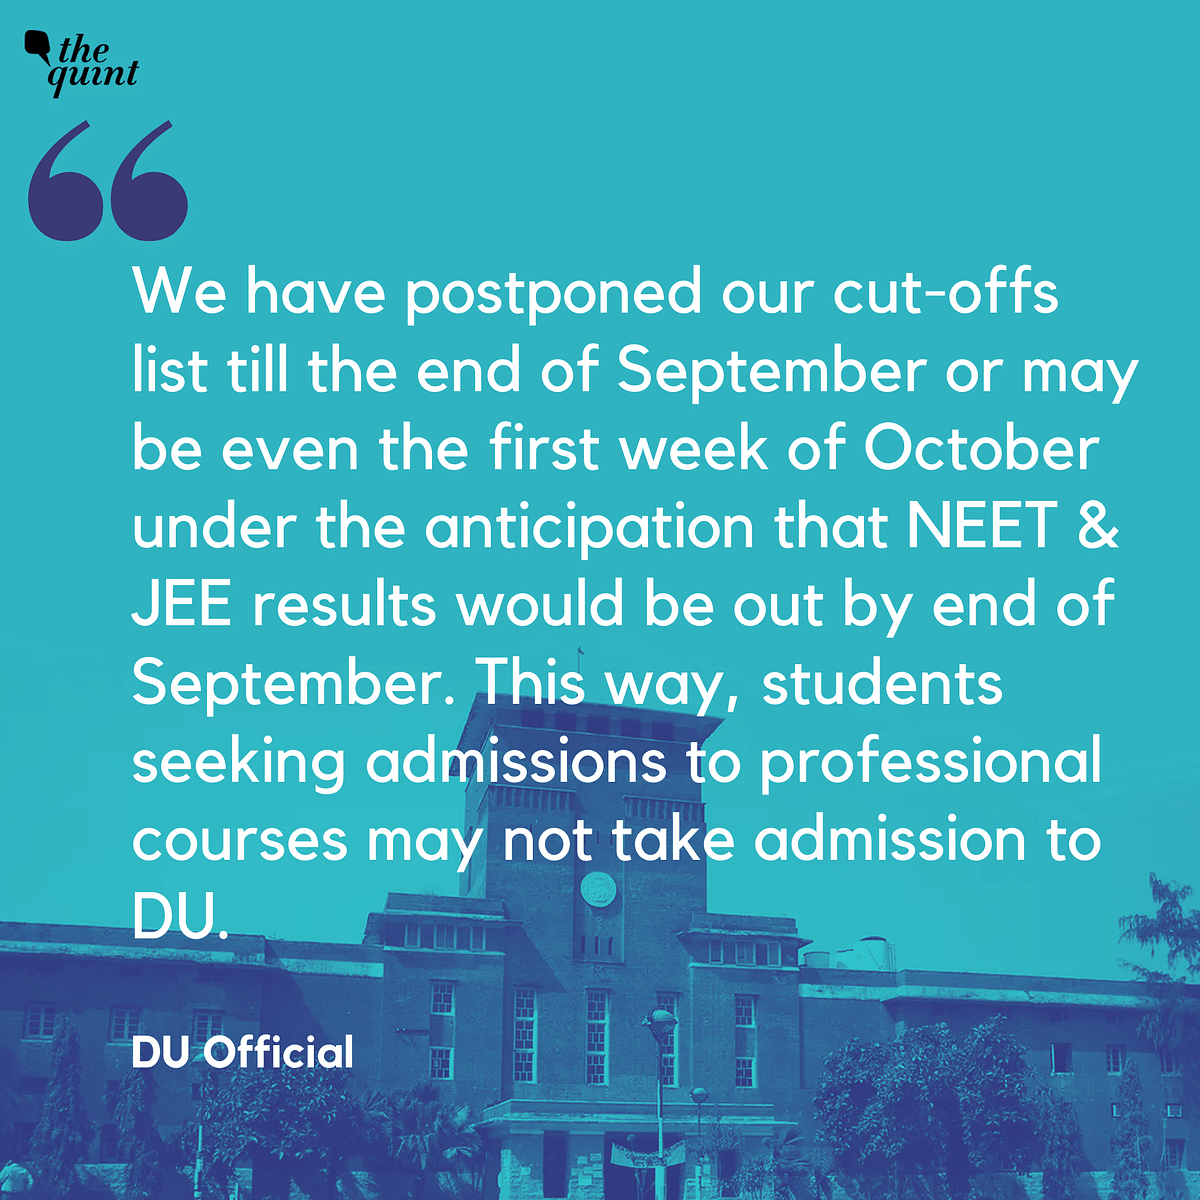 Delhi University fears that a large number of students may vacate seats after JEE & NEET results.